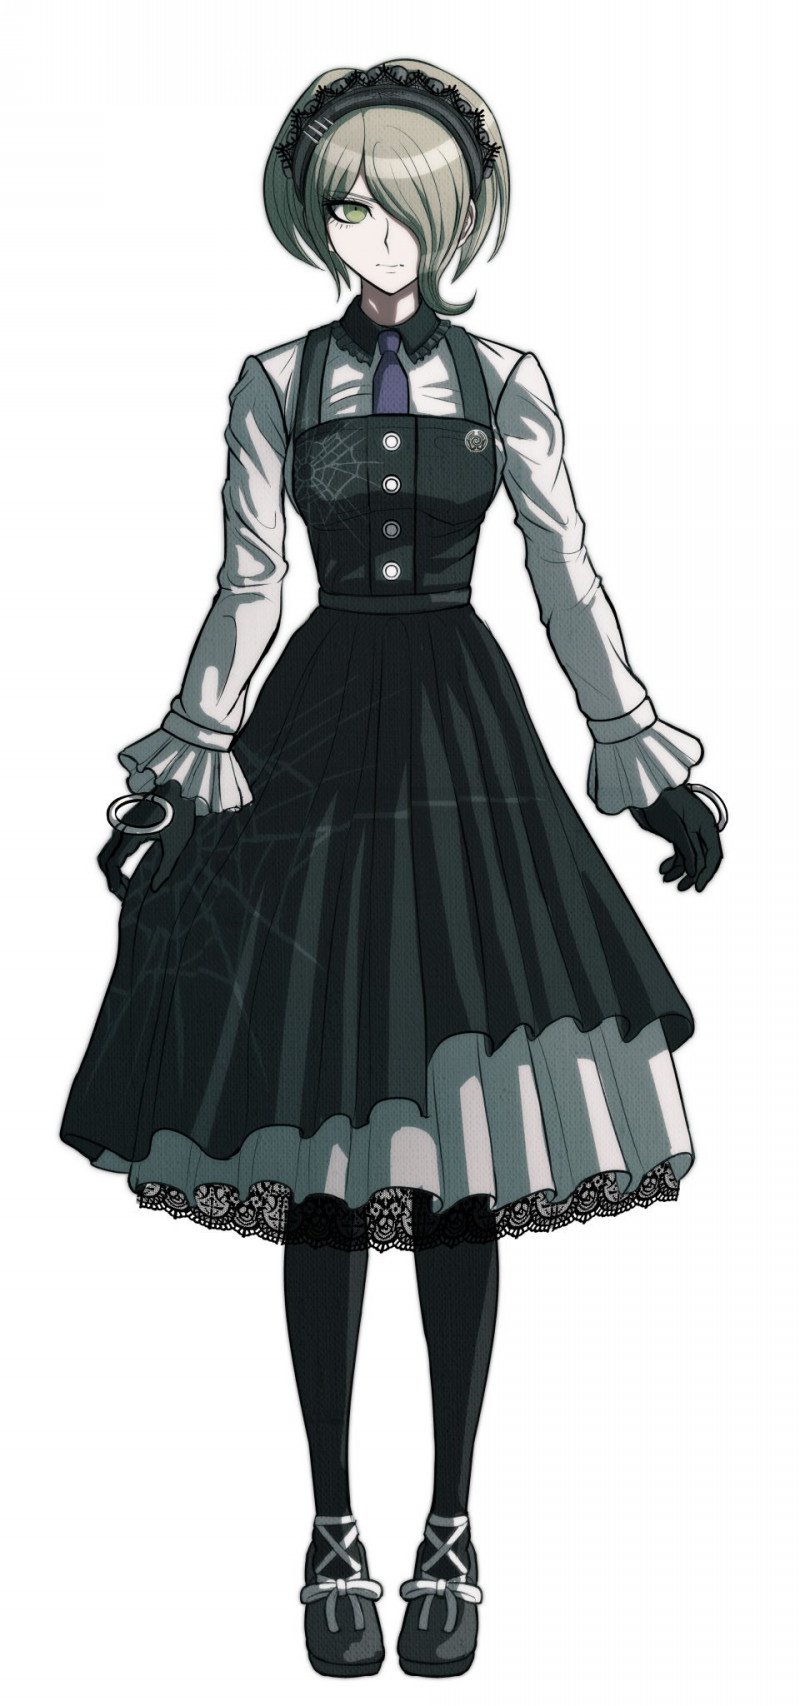 Danganronpa Wiki on Twitter: "We also have a complete set of Kirumi